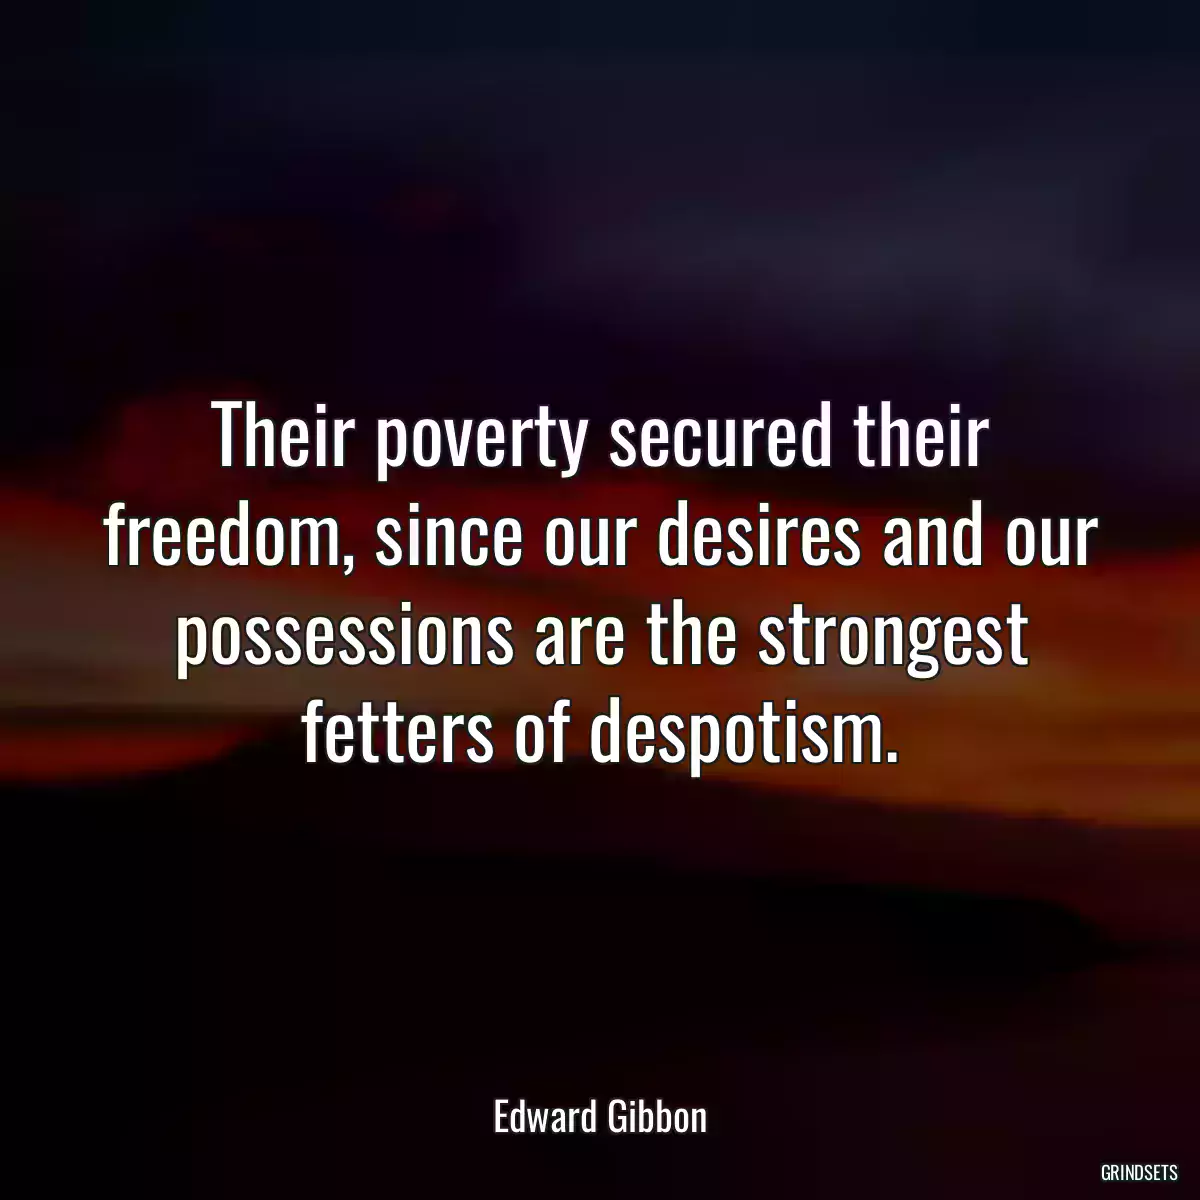 Their poverty secured their freedom, since our desires and our possessions are the strongest fetters of despotism.